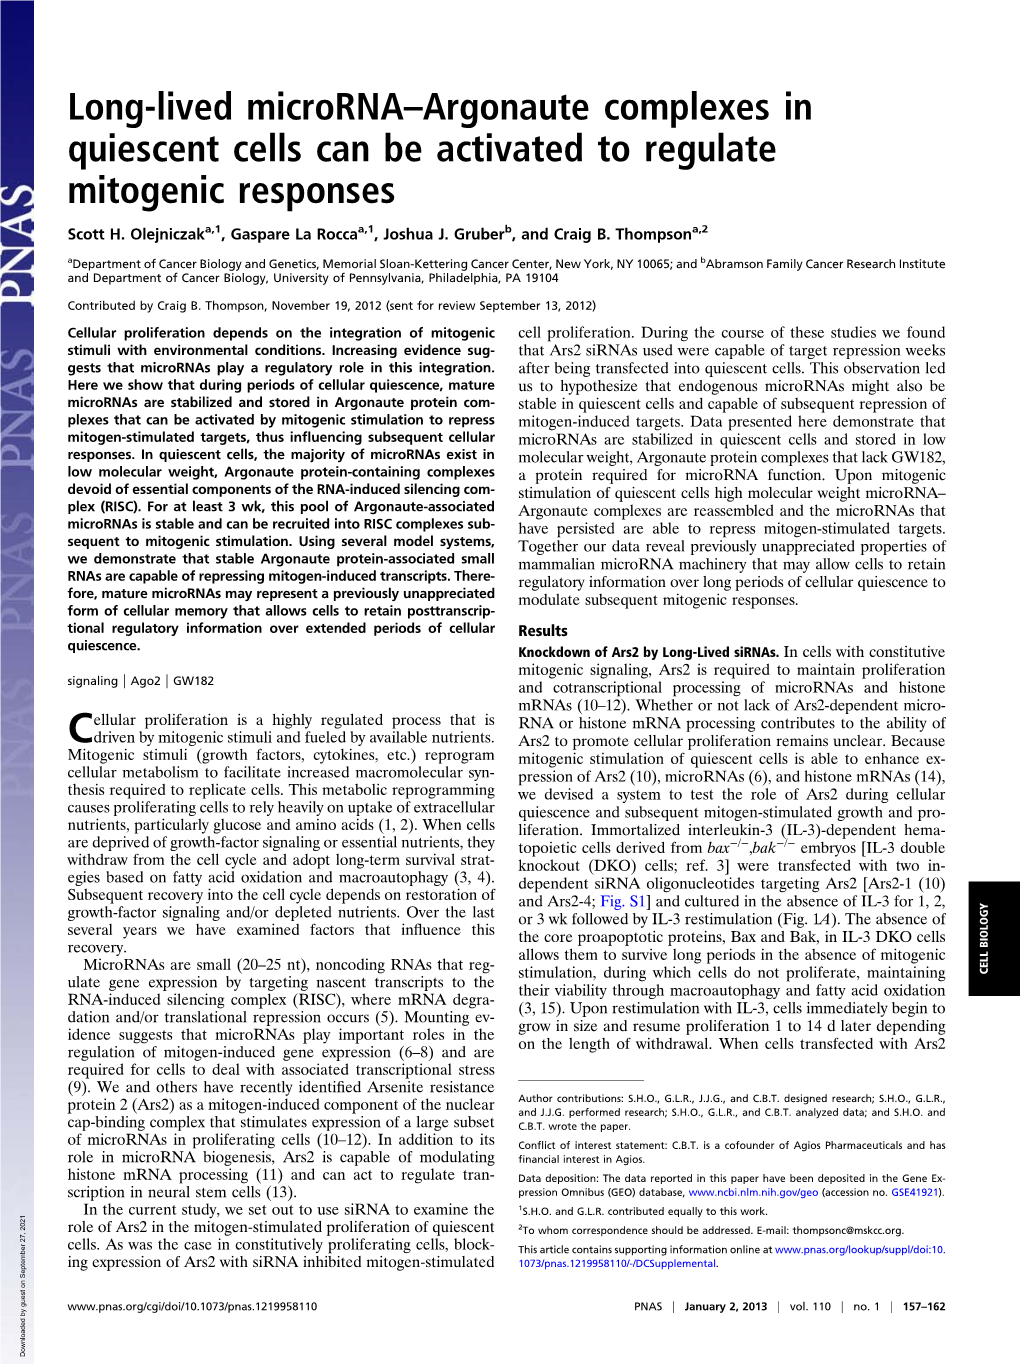 Long-Lived Microrna–Argonaute Complexes in Quiescent Cells Can Be Activated to Regulate Mitogenic Responses